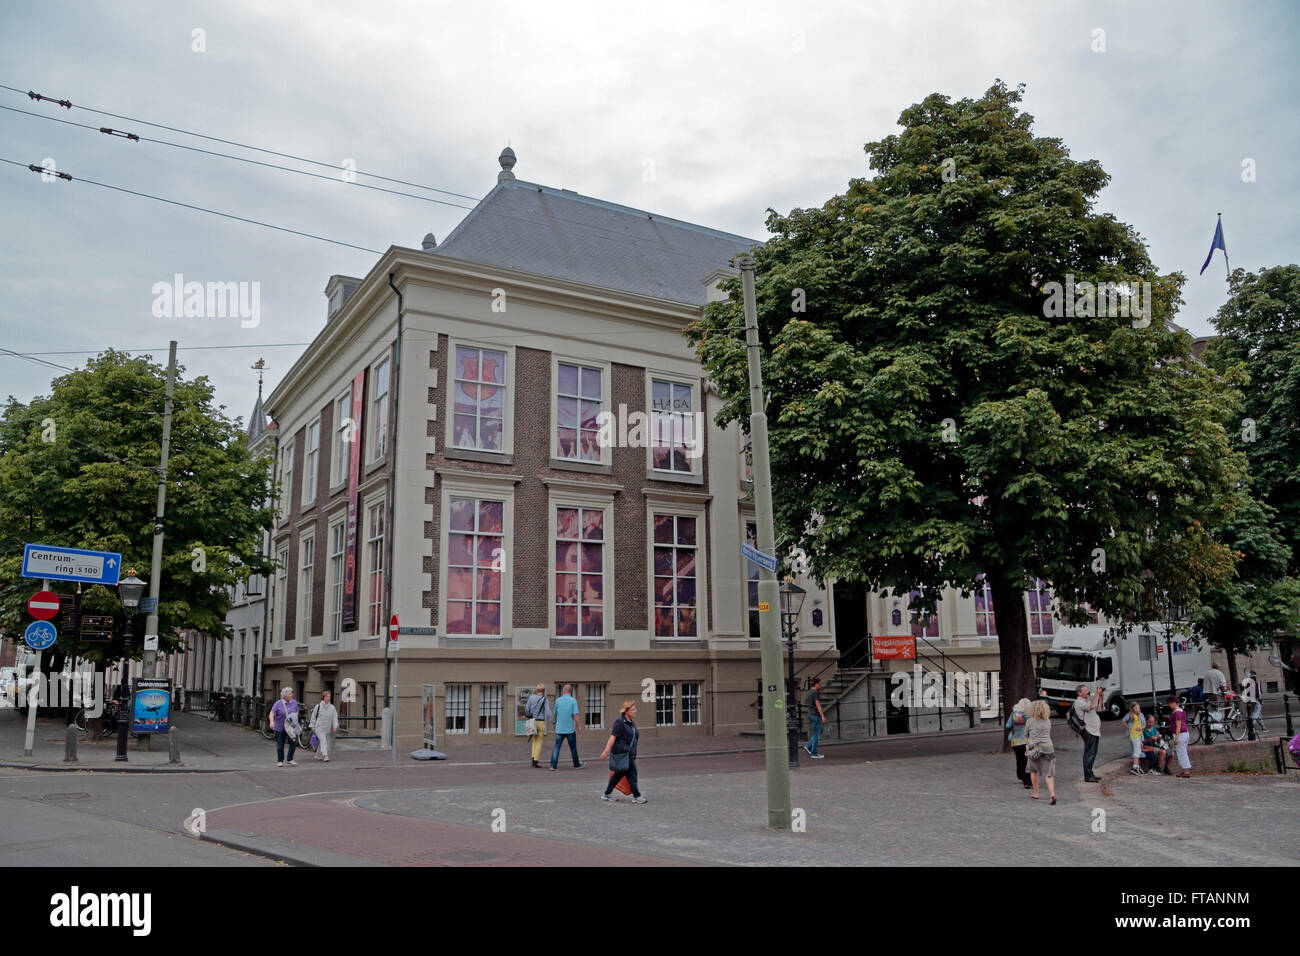 The Haags Historisch Museum (Historical Museum of The Hague) in The Hague, Netherlands. Stock Photo